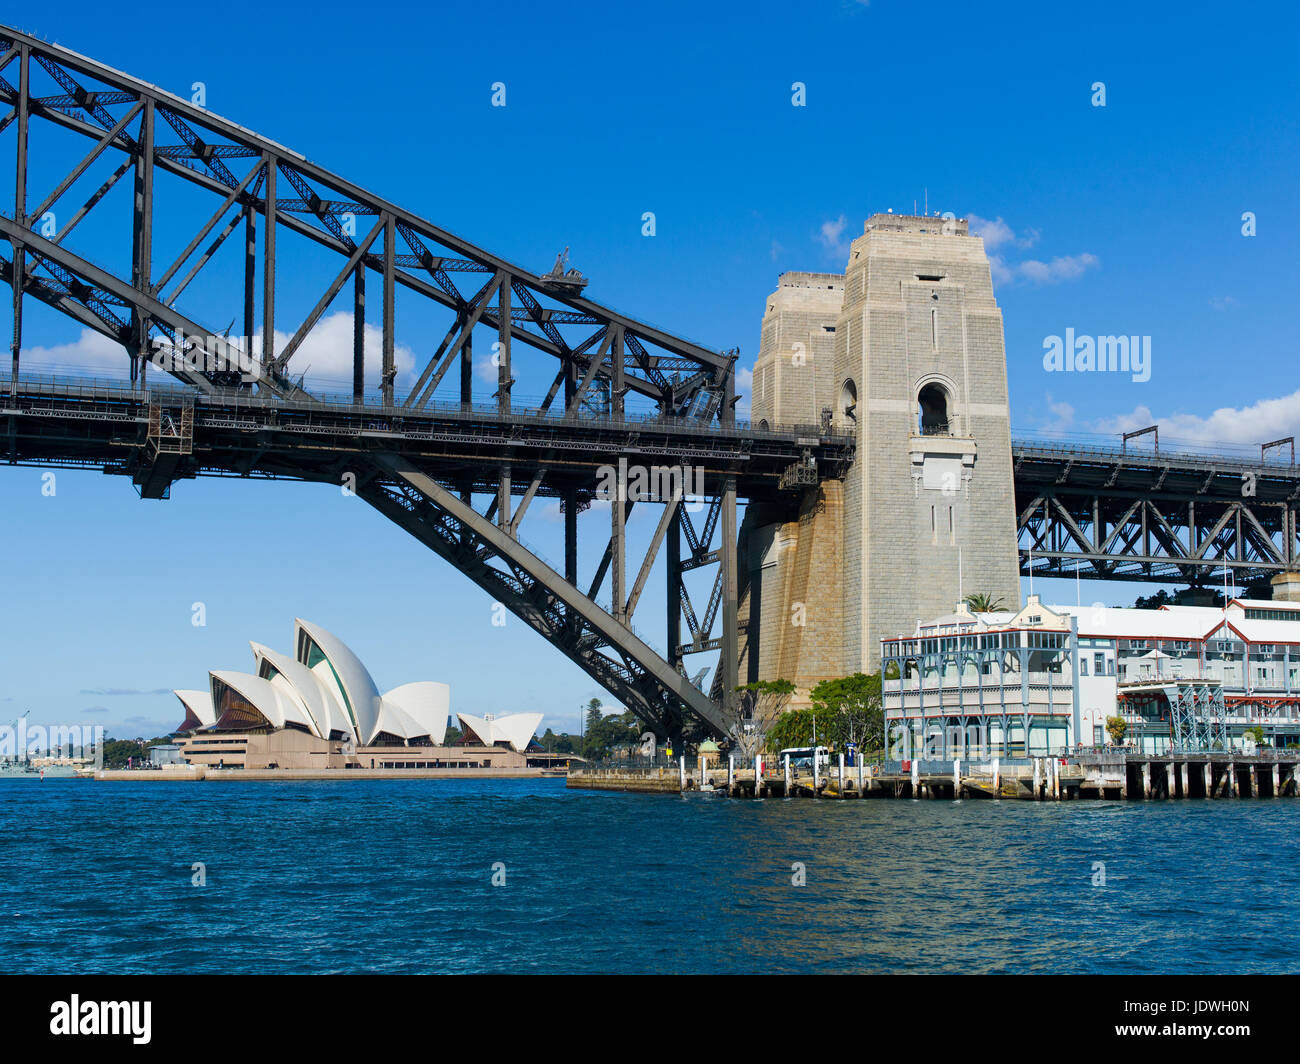 Harbour Bridge and Opera House, Sydney, viewed from a ferry, NSW, Australia, Winter Sunshine Stock Photo